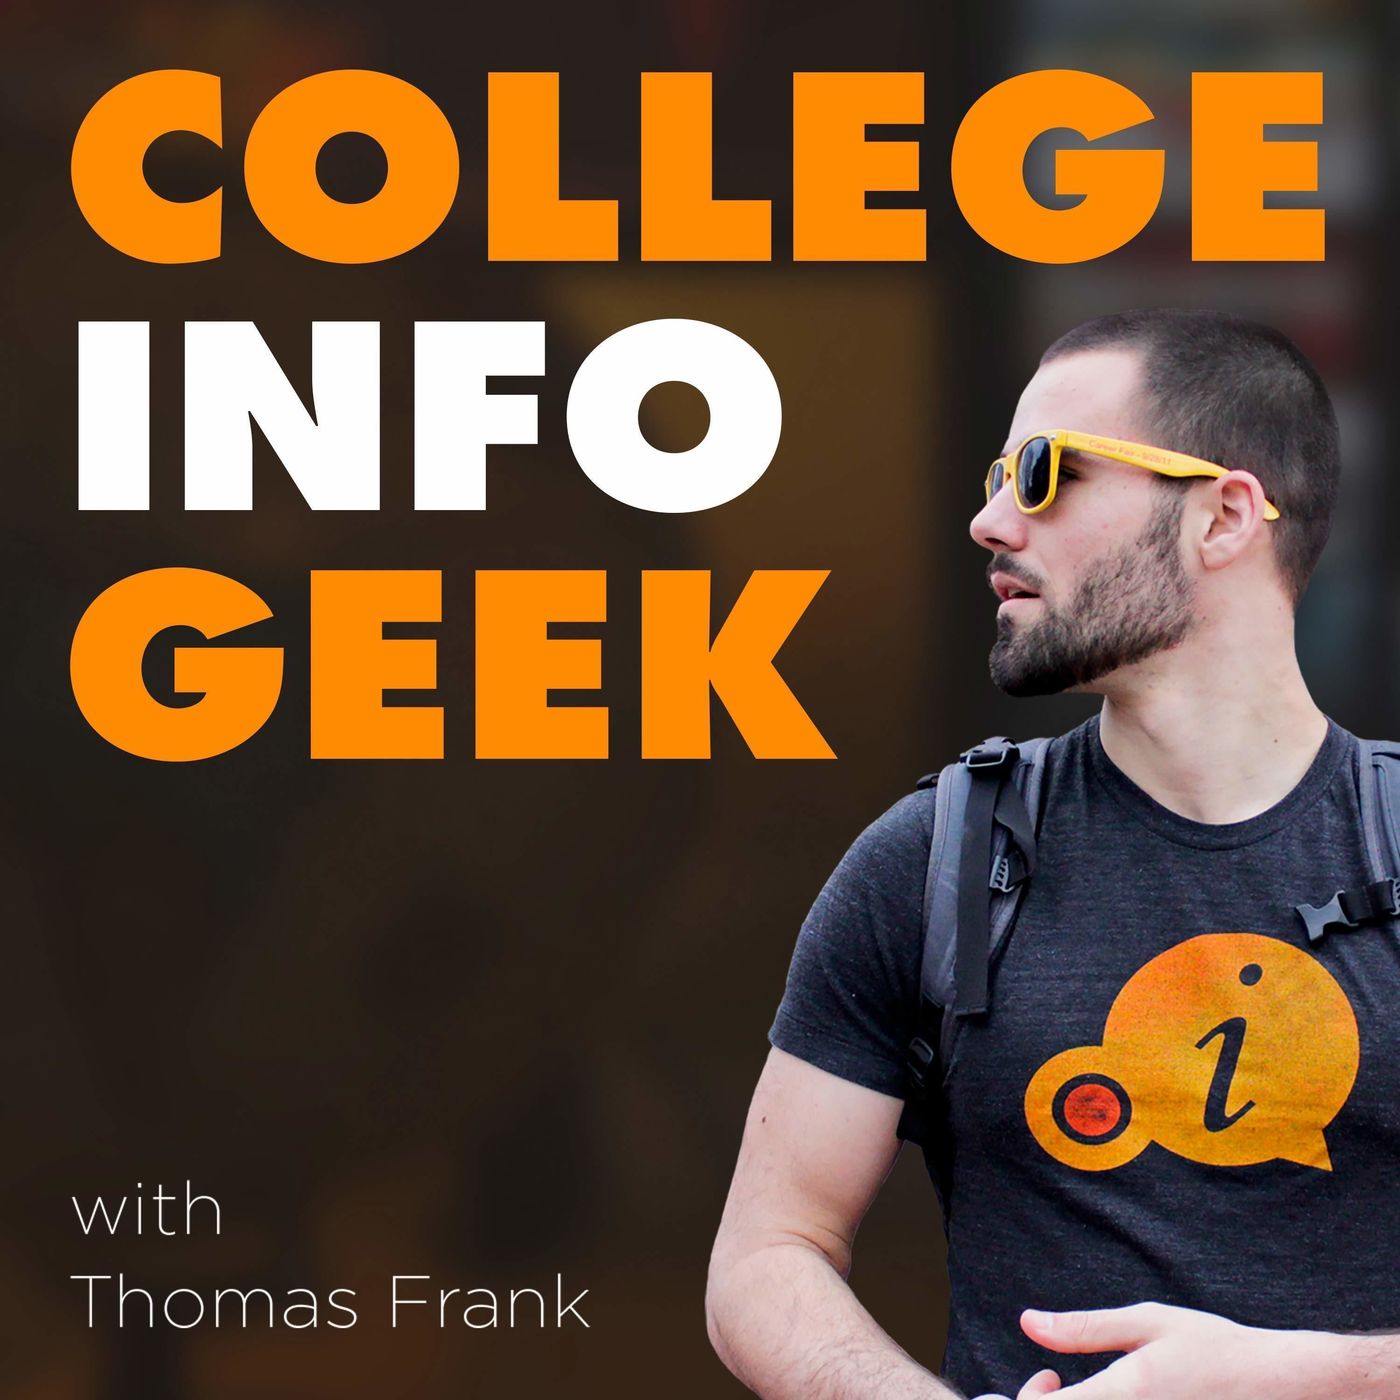 5 Questions: Most Valuable Life Skills, Class Selection Strategy, & Switching Majors (Ep. 118)